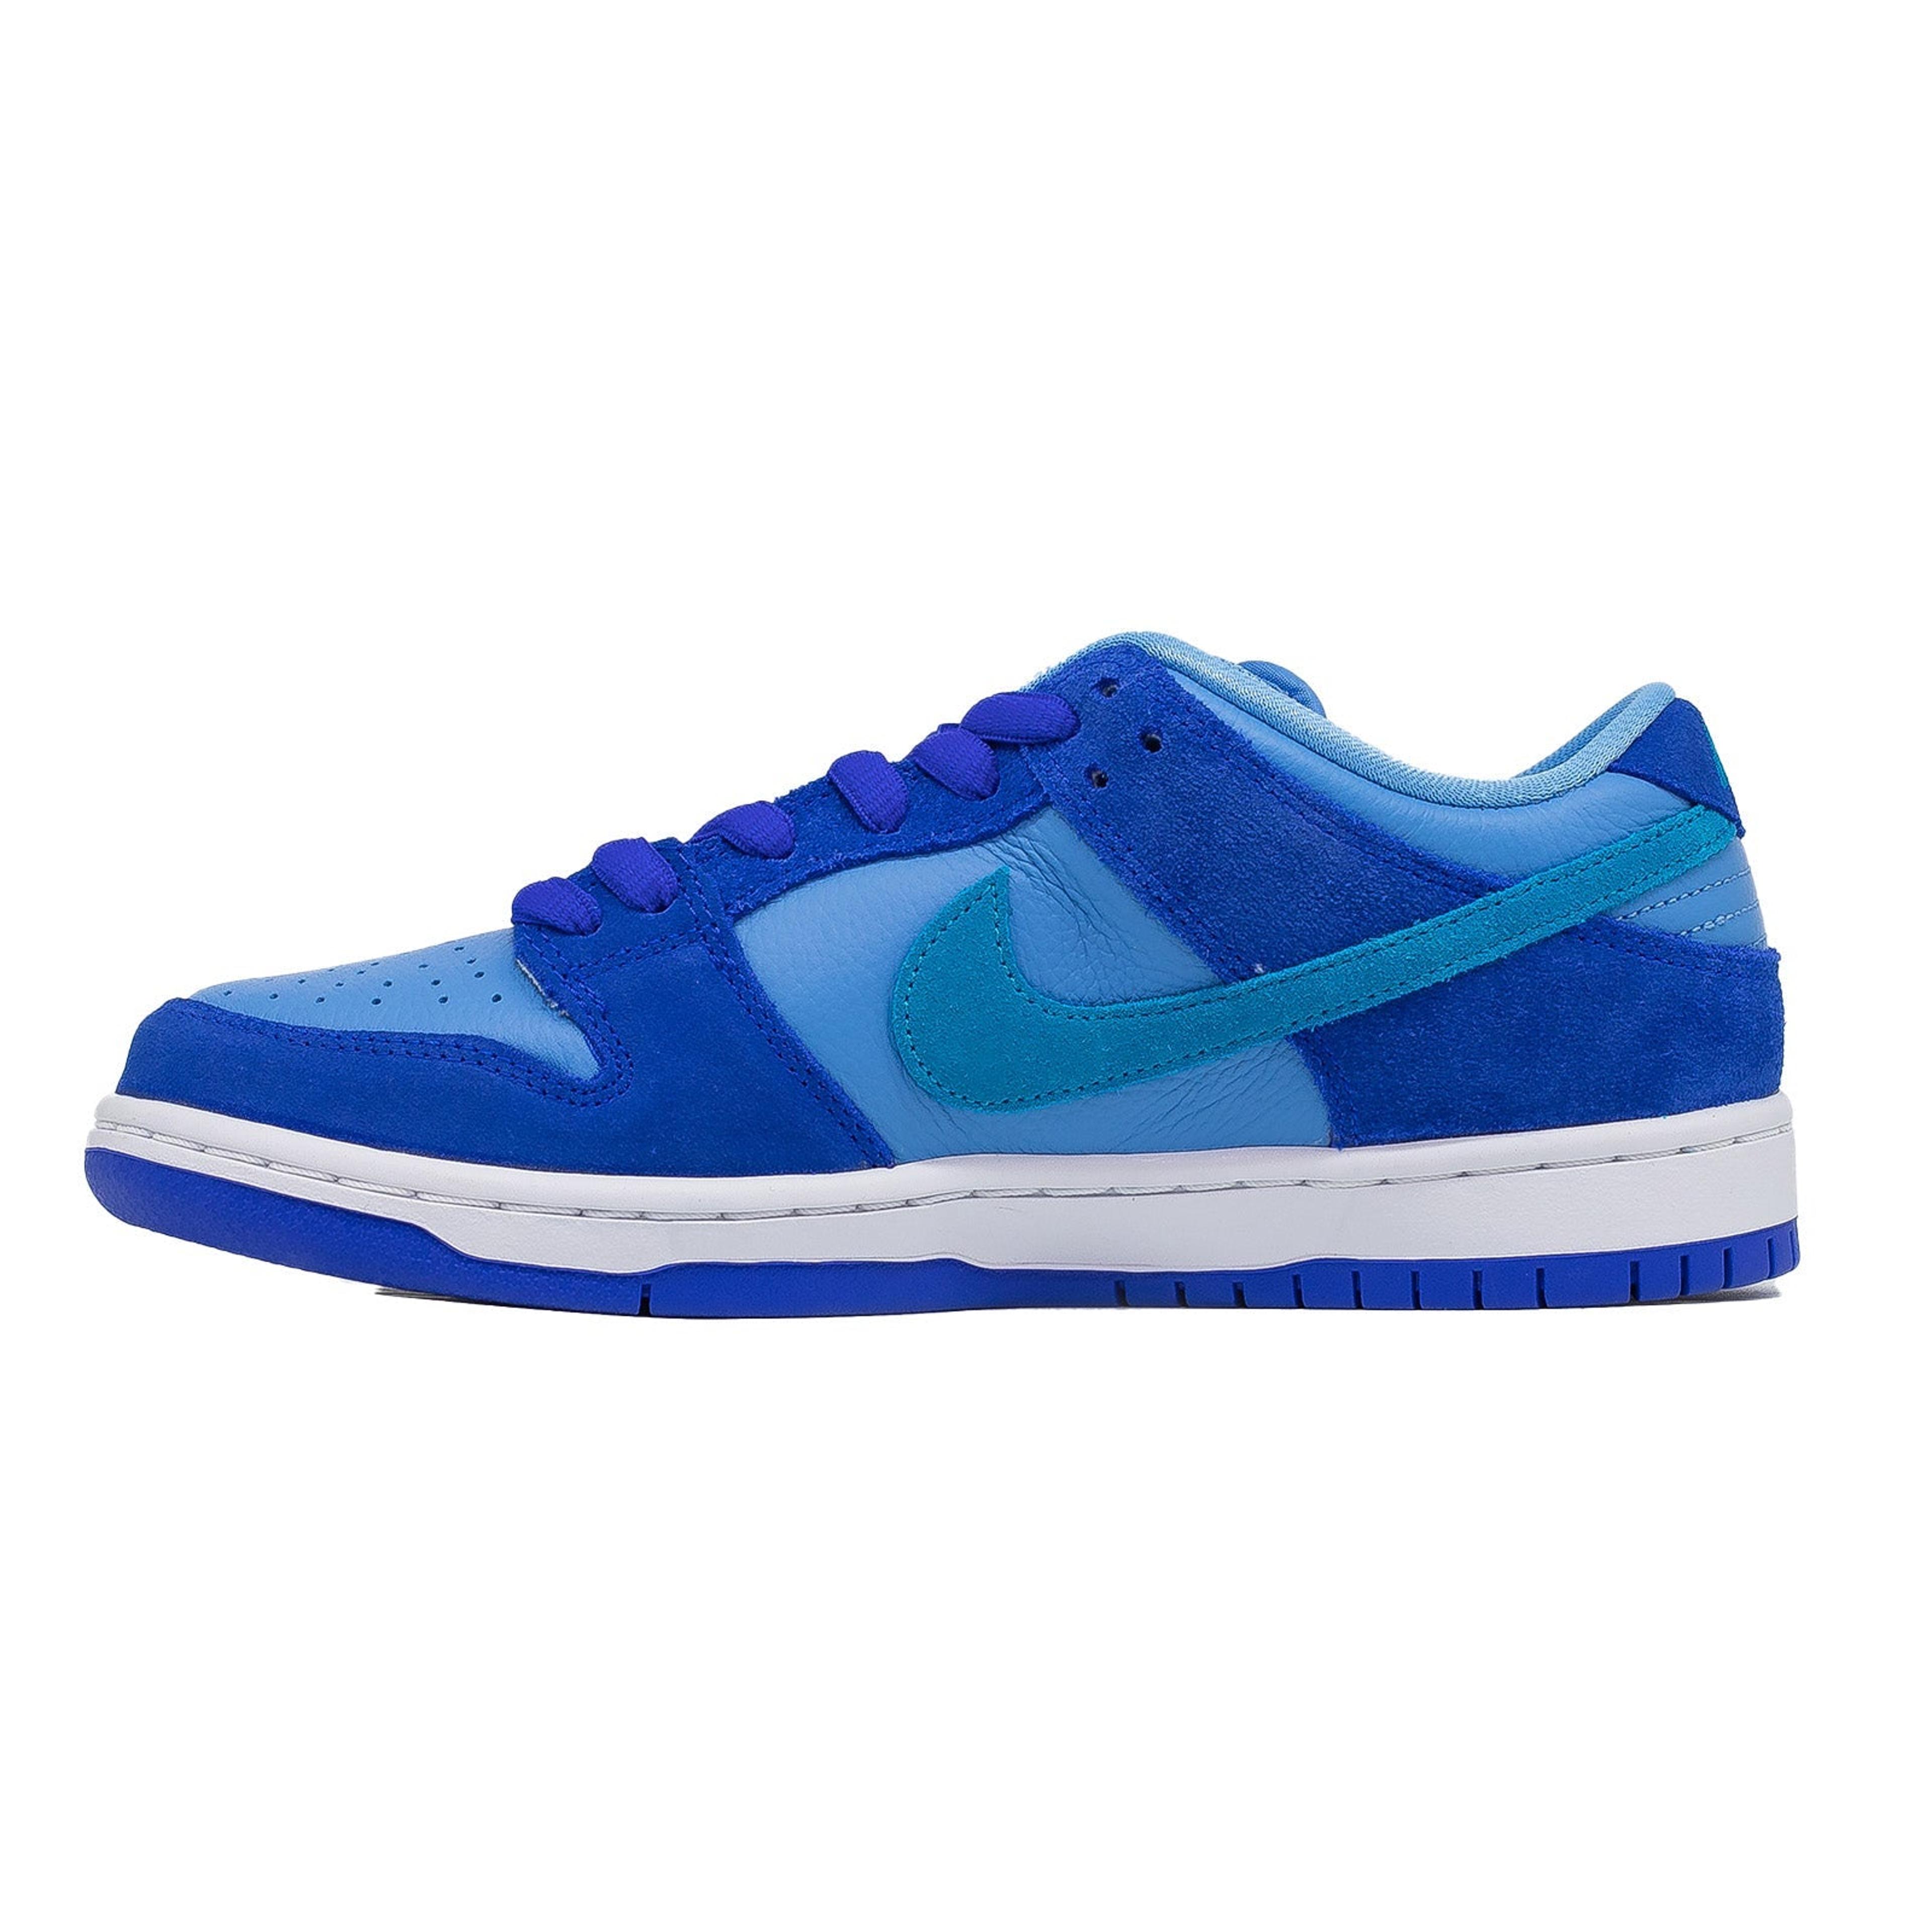 Alternate View 1 of Nike SB Dunk Low, Fruity Pack - Blue Raspberry